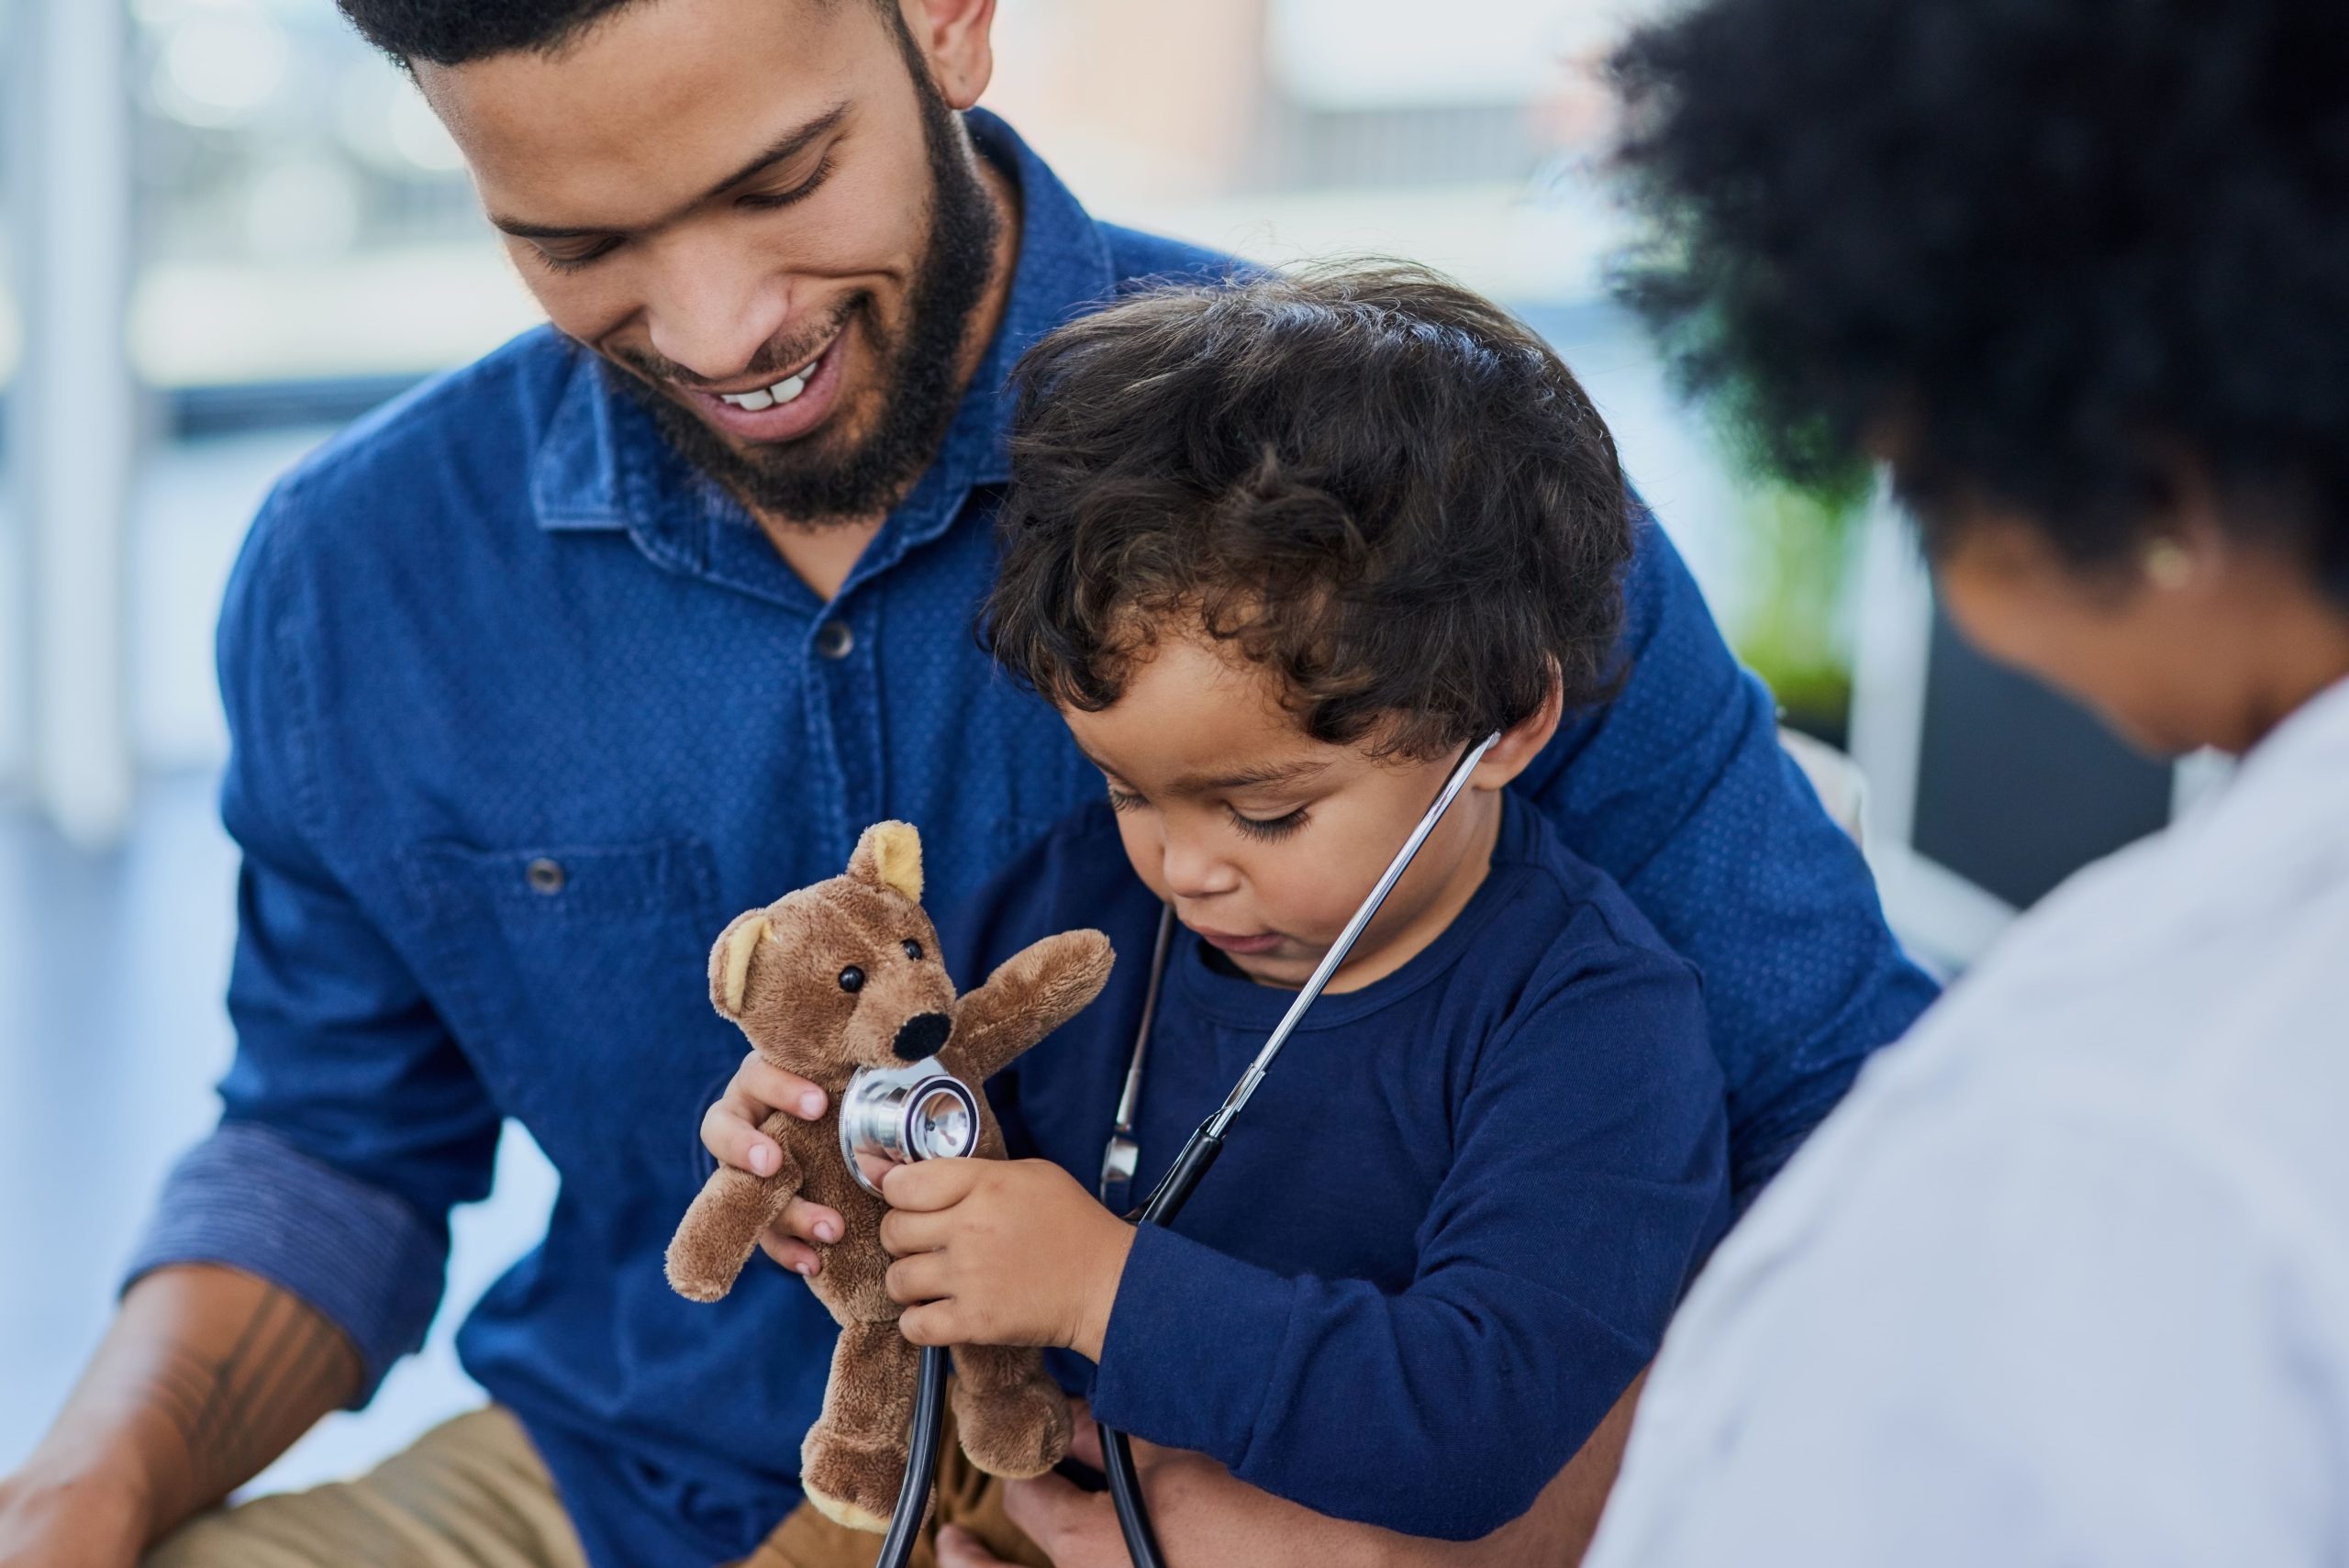 A young child at the doctor's office sits on his smiling dad's lap and uses a stethoscope to listen to his small teddy bear. A doctor stands off to the side.